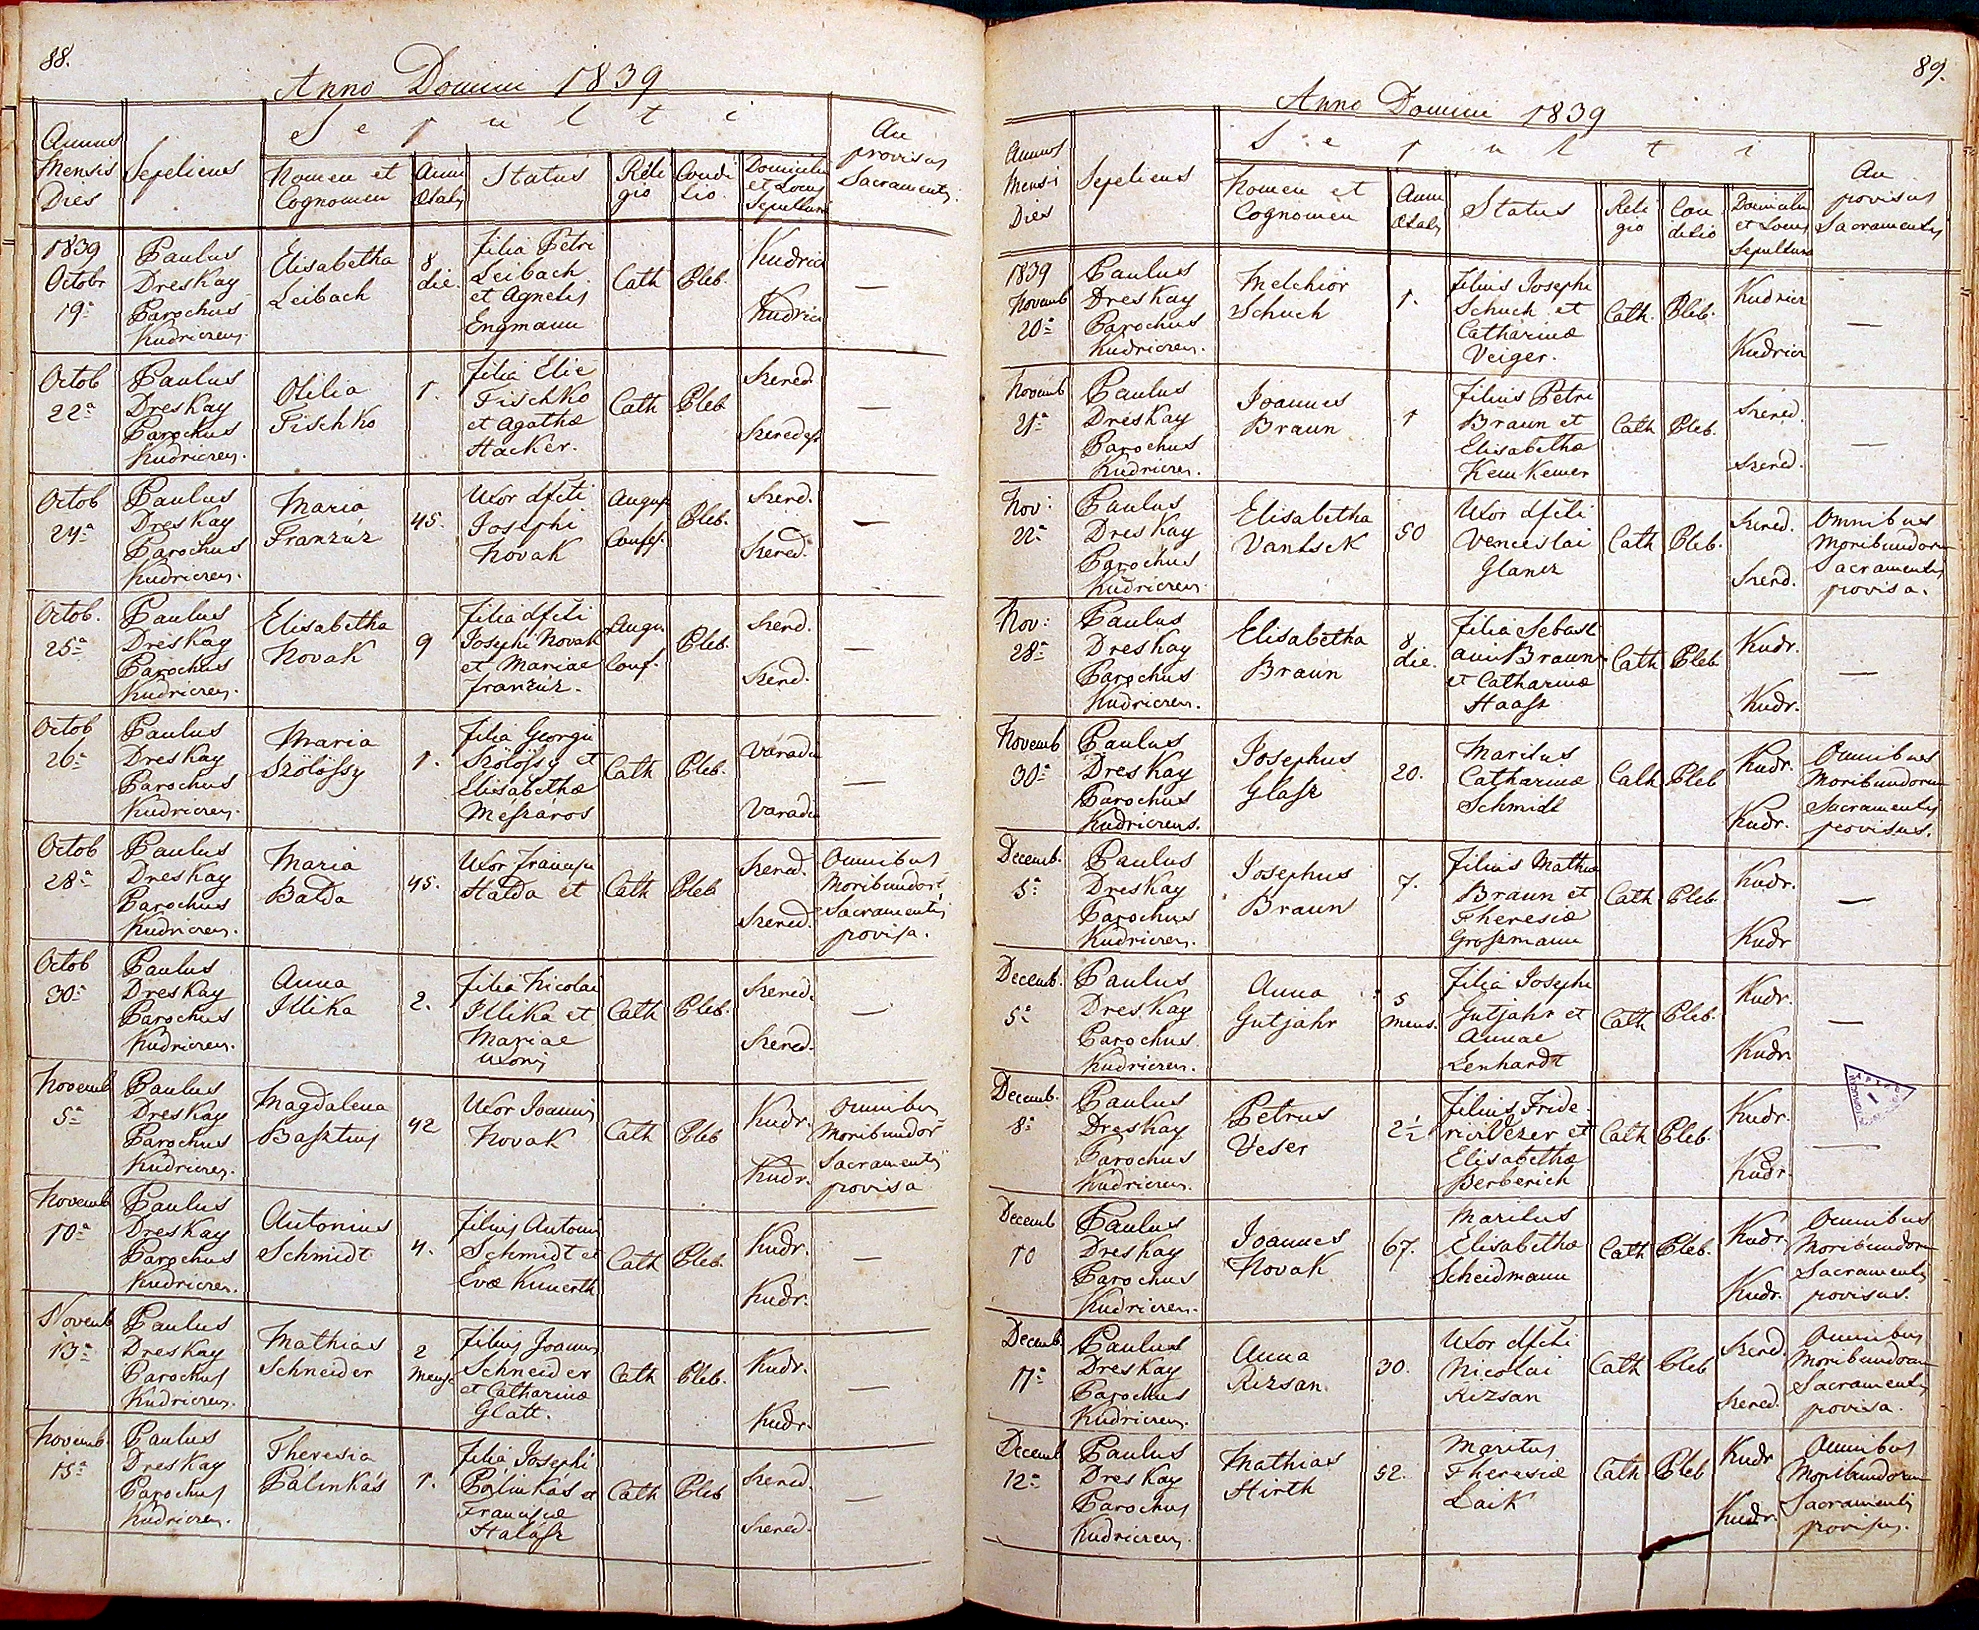 images/church_records/DEATHS/1829-1851D/088 i 089